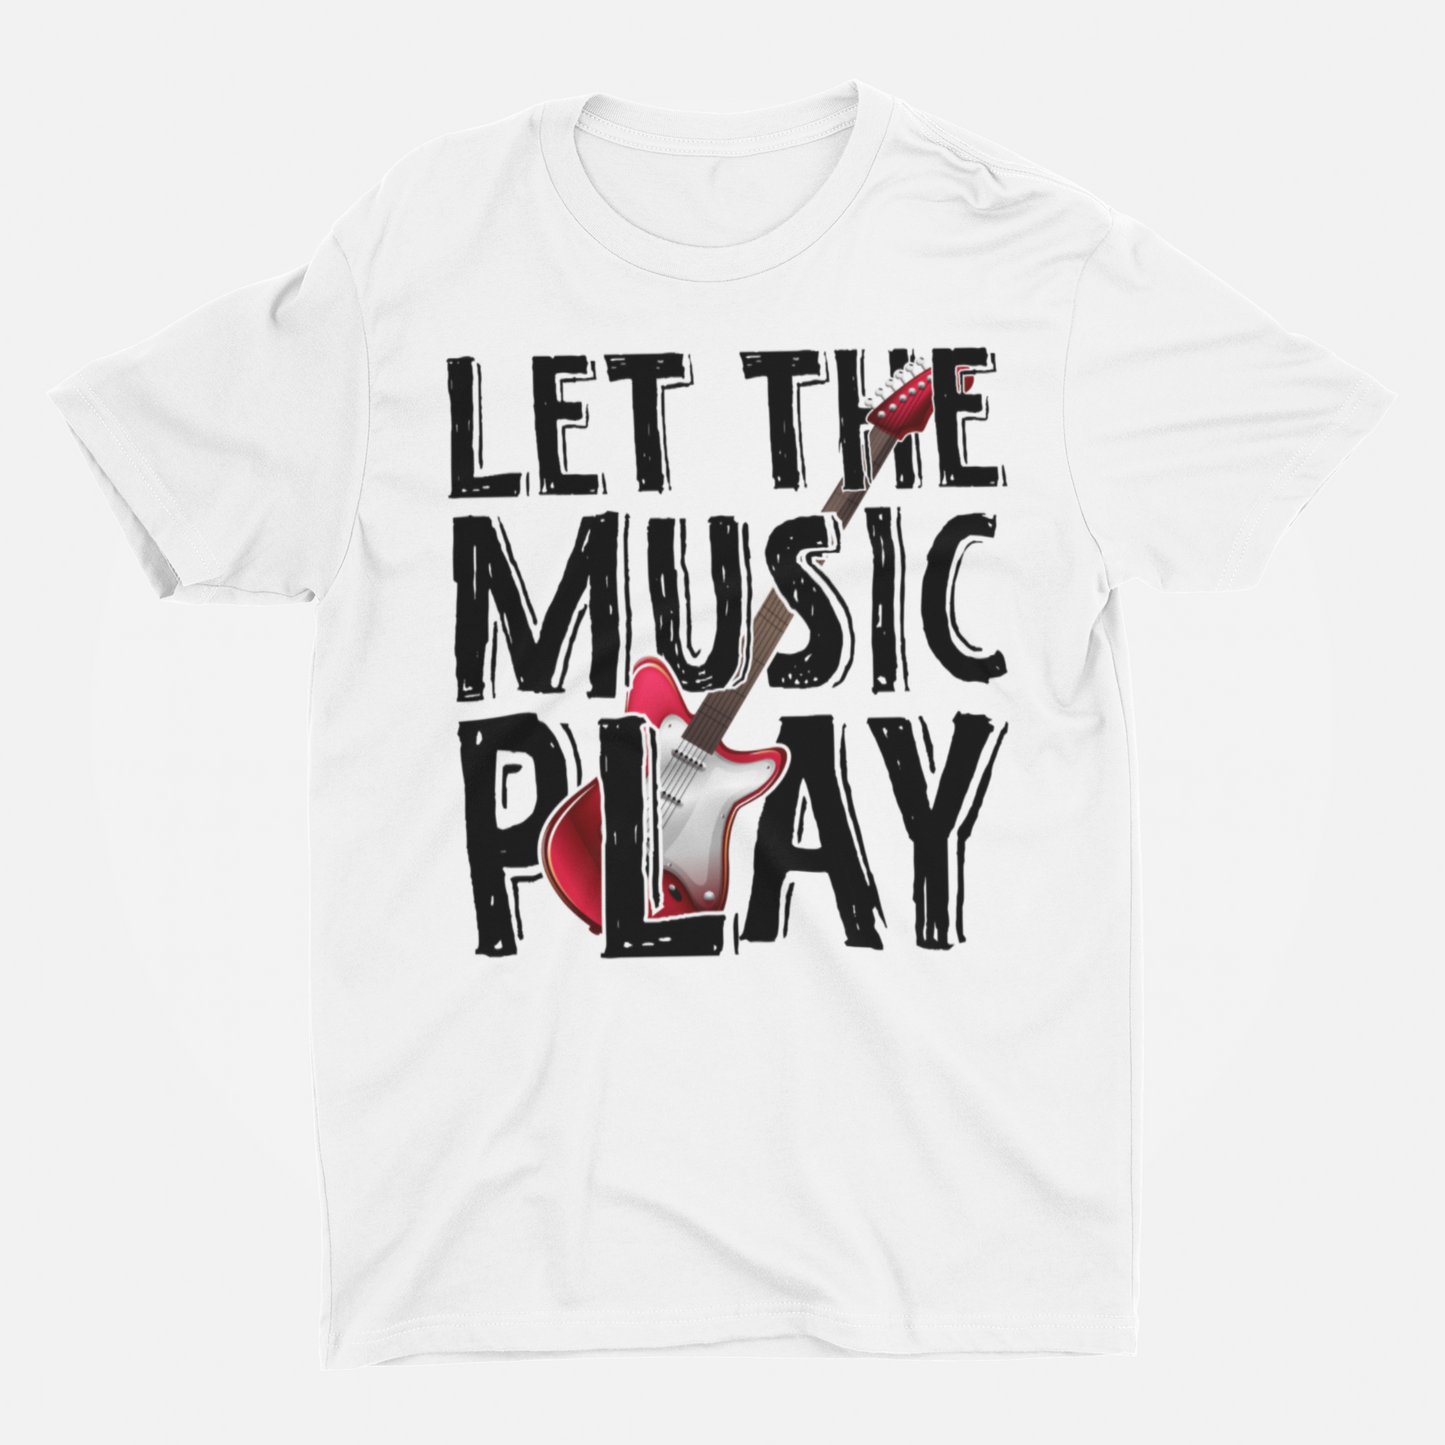 Let The Music Play White Round Neck T-Shirt for Men